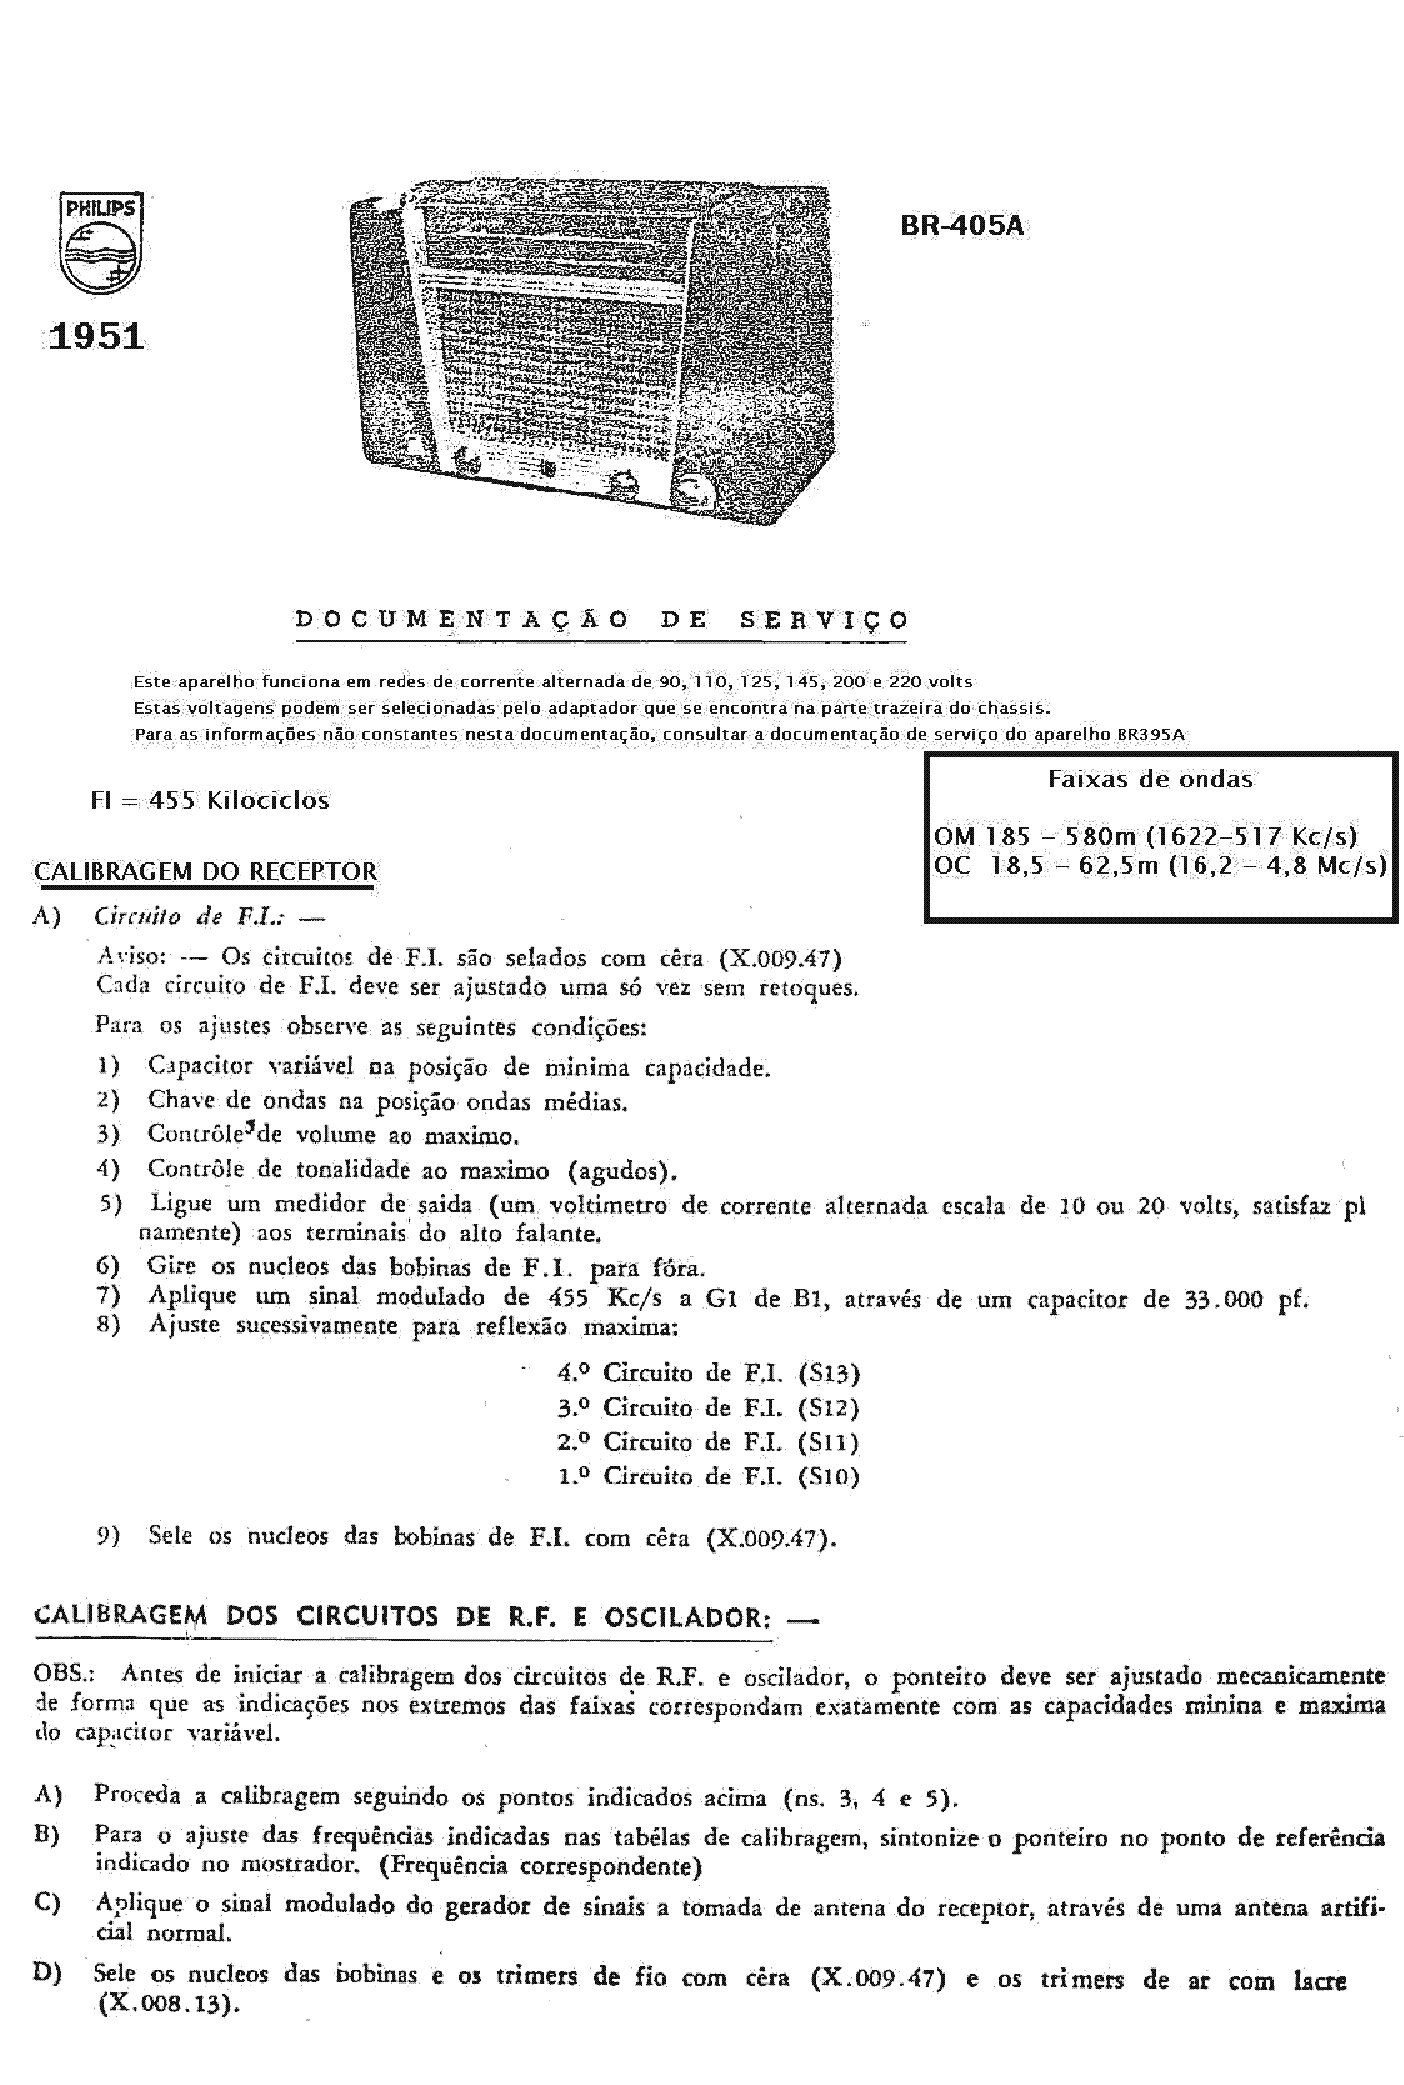 PHILIPS BR405A AC RADIO 1956 SCH service manual (1st page)